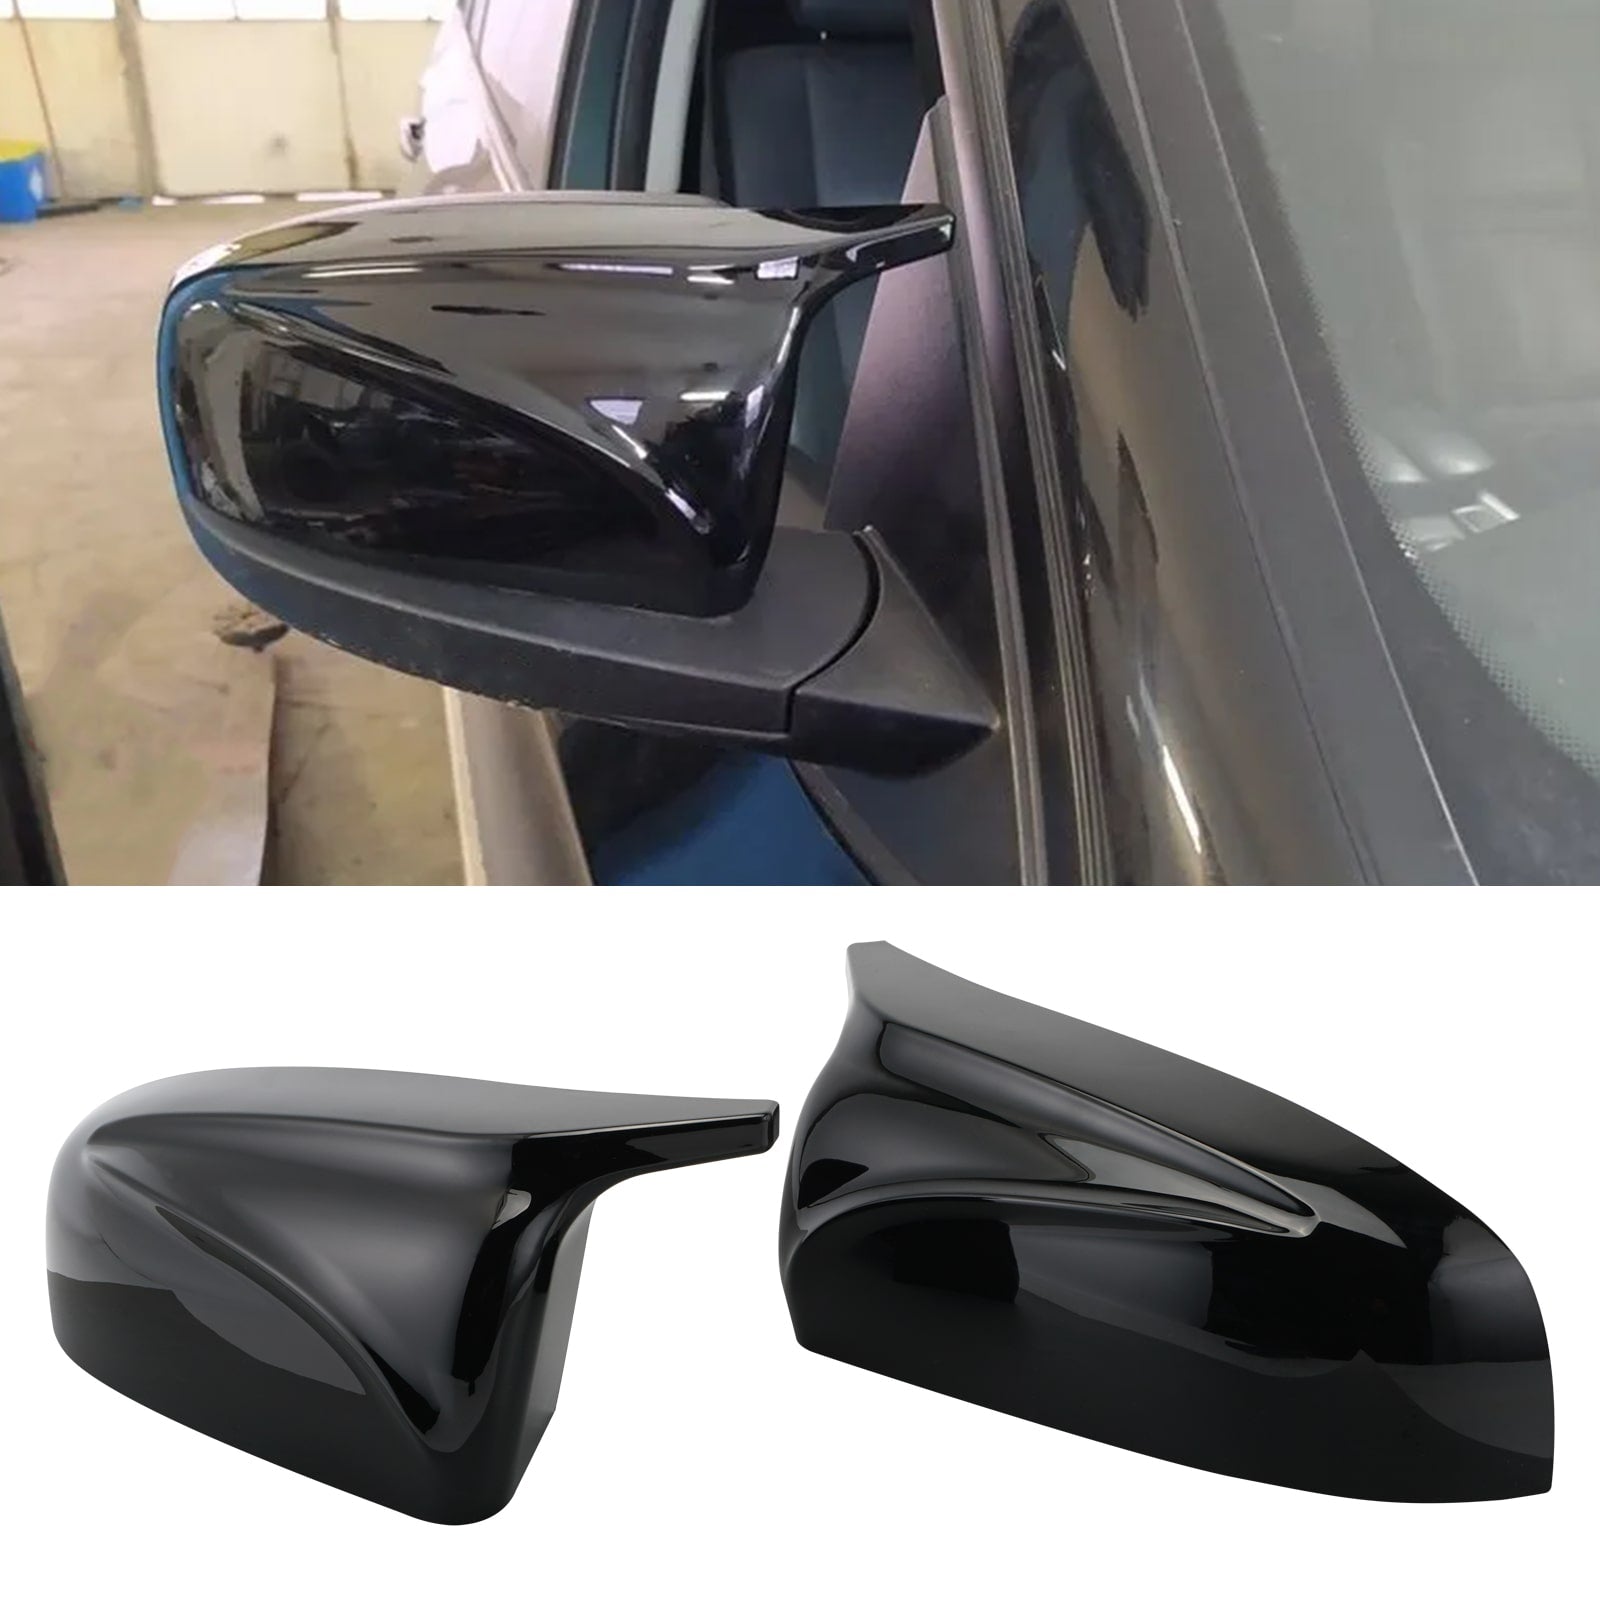 2PCS M-Style Rearview Side Mirror Cover For BMW X5 X6 E70 E71  2008-2012